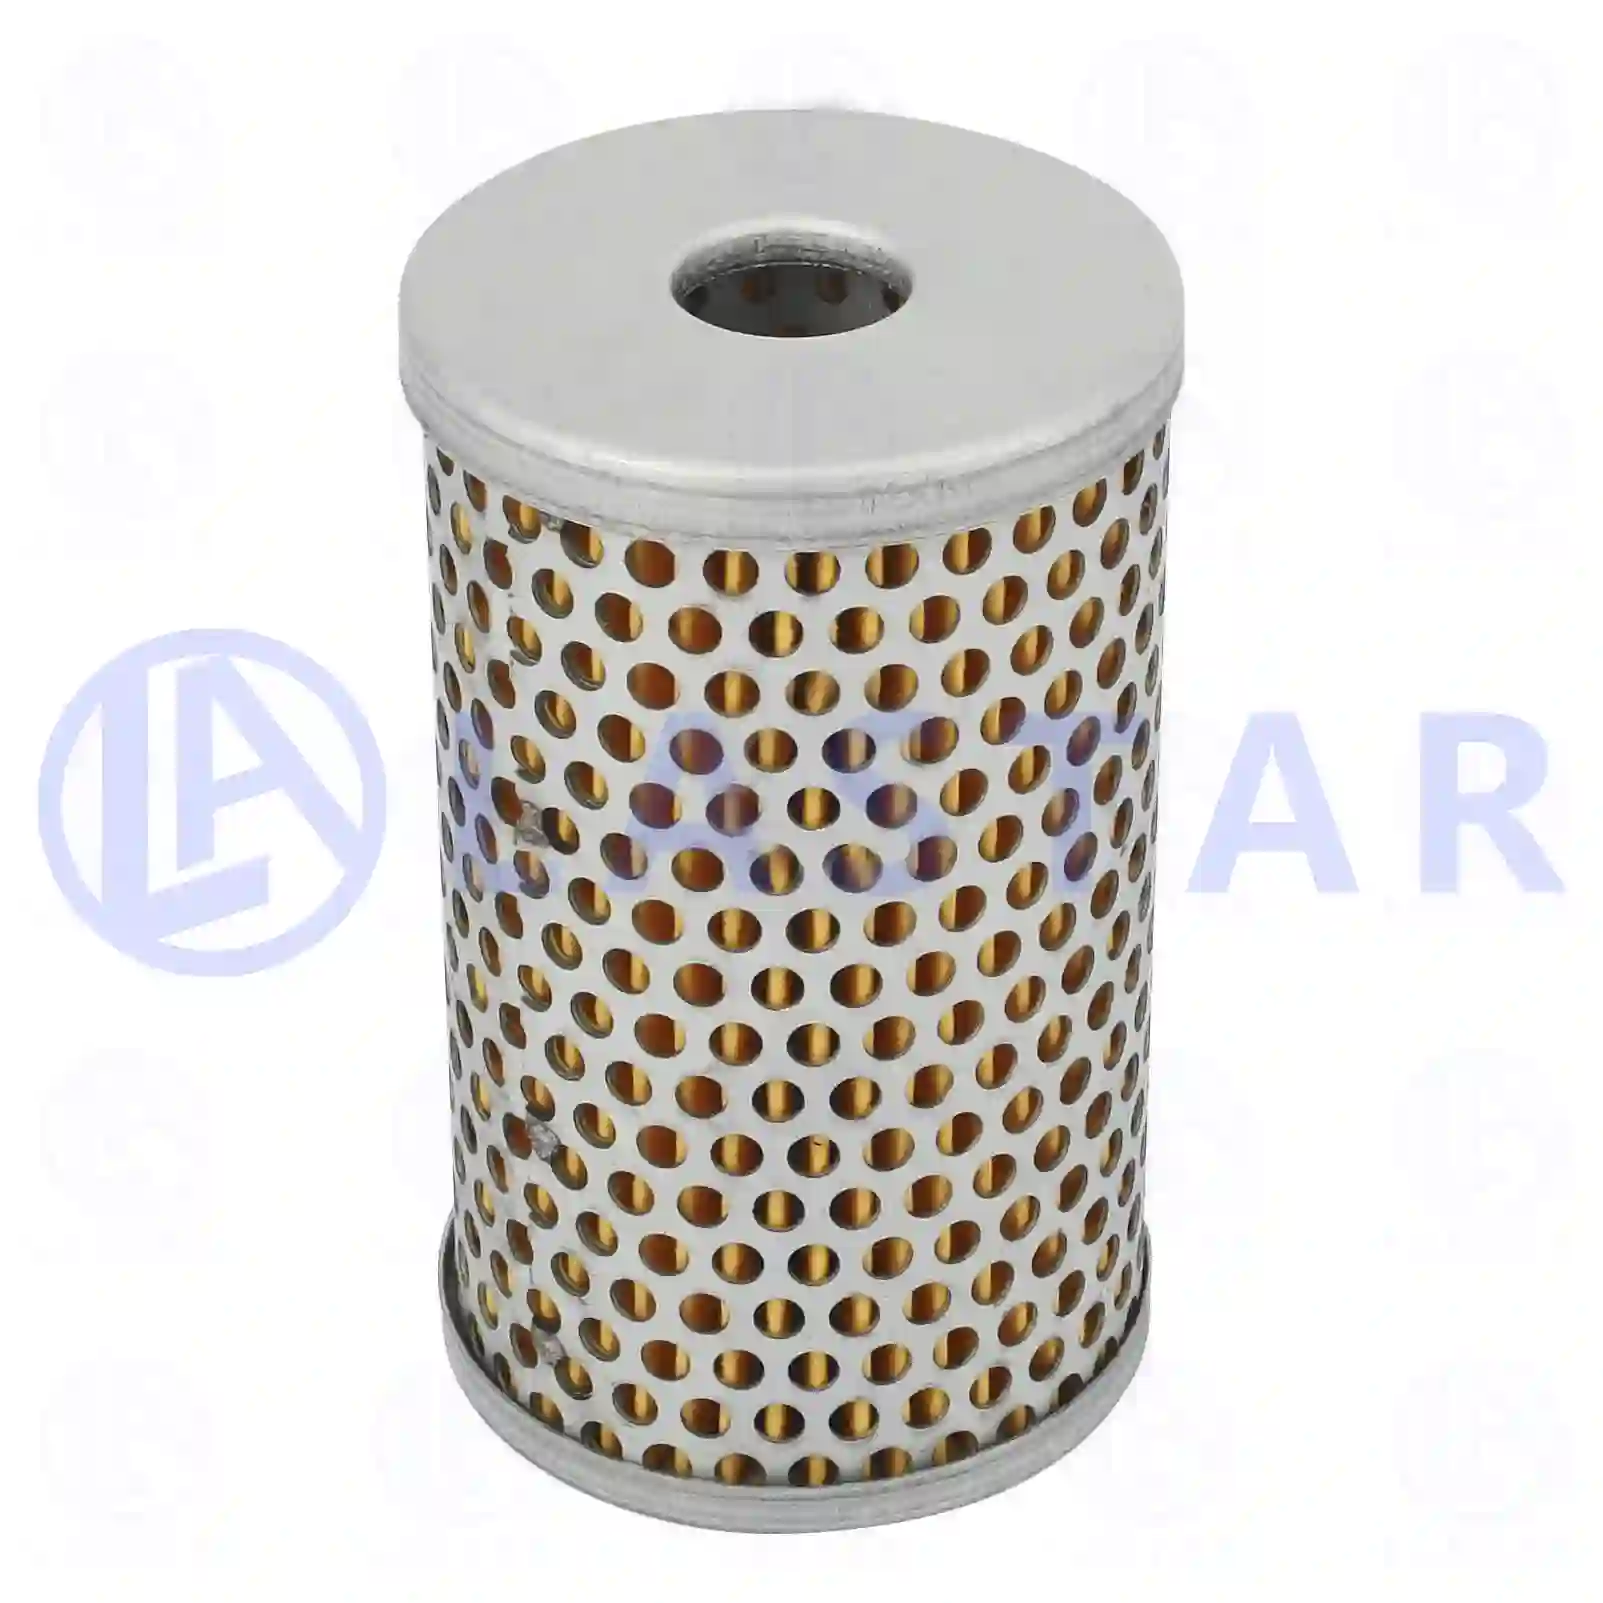 Oil filter insert, 77705048, 01902137, 02966261, T11145397, 0004662804, 0661135, 0661160, 11420661132, 11420661135, 11420661160, 11421256260, 11429061088, 11507423009, 11507425104, 32411120717, 11842225, 1842225, 1844901, 4660204, 4660604, 0229348, 1500663, 2293248, 229348, 491810, 7632141111, 905480, BBU5866, 02966251, 02966261, 2680500218, 00269661, 01902137, 02696621, 02966251, 02966261, 09914553, 42559501, 45481348, 5000674, 5000675, 5000676, 5011425, 5012553, OG0000084646, 5577966, 7984959, 9975217, 5577966, 7984260, 7984959, 93156615, 97094732, 2889829M91, 371912793, 04045601, 00966261, 01268424, 01902137, 01908082, 02696621, 02966251, 02966261, 09914553, 1902137, 2966261, 42553041, 42559501, 503120251, 5000820895, 5001018962, 02966251, 02966261, 81473016005, 81473070008, 85400003330, 2889829, 2889829M91, 0000940404, 0001184225, 0001842225, 0001842325, 0001844701, 0001844901, 0001845801, 0001846301, 0001846525, 0004660204, 0004660404, 0004660604, 0004662804, 0004663004, 0011842225, 0021841125, 1021800109, 1021840425, 8225000030, 8225000232, 013200300, 5000814407, 5000820895, 5001871595, 5021107375, 6005019563, 6005019804, 7400349619, 7420580233, 7421392404, 8499135552, HD604, 00119590, 1343242, 153465, 153468, 1953094, 8225000030, 8225000232, 1296311510, 1696311510, 5104504020, 480A4700748, 480A470060, 480A470748, 5011070580, 216230, 632114112, 15856180, 20580233, 21392404, 349619, 3496191, 3496197, 6612098, 7349619, 85103870, 2V5422384A, 400700504, T11145397, ZG03044-0008 ||  77705048 Lastar Spare Part | Truck Spare Parts, Auotomotive Spare Parts Oil filter insert, 77705048, 01902137, 02966261, T11145397, 0004662804, 0661135, 0661160, 11420661132, 11420661135, 11420661160, 11421256260, 11429061088, 11507423009, 11507425104, 32411120717, 11842225, 1842225, 1844901, 4660204, 4660604, 0229348, 1500663, 2293248, 229348, 491810, 7632141111, 905480, BBU5866, 02966251, 02966261, 2680500218, 00269661, 01902137, 02696621, 02966251, 02966261, 09914553, 42559501, 45481348, 5000674, 5000675, 5000676, 5011425, 5012553, OG0000084646, 5577966, 7984959, 9975217, 5577966, 7984260, 7984959, 93156615, 97094732, 2889829M91, 371912793, 04045601, 00966261, 01268424, 01902137, 01908082, 02696621, 02966251, 02966261, 09914553, 1902137, 2966261, 42553041, 42559501, 503120251, 5000820895, 5001018962, 02966251, 02966261, 81473016005, 81473070008, 85400003330, 2889829, 2889829M91, 0000940404, 0001184225, 0001842225, 0001842325, 0001844701, 0001844901, 0001845801, 0001846301, 0001846525, 0004660204, 0004660404, 0004660604, 0004662804, 0004663004, 0011842225, 0021841125, 1021800109, 1021840425, 8225000030, 8225000232, 013200300, 5000814407, 5000820895, 5001871595, 5021107375, 6005019563, 6005019804, 7400349619, 7420580233, 7421392404, 8499135552, HD604, 00119590, 1343242, 153465, 153468, 1953094, 8225000030, 8225000232, 1296311510, 1696311510, 5104504020, 480A4700748, 480A470060, 480A470748, 5011070580, 216230, 632114112, 15856180, 20580233, 21392404, 349619, 3496191, 3496197, 6612098, 7349619, 85103870, 2V5422384A, 400700504, T11145397, ZG03044-0008 ||  77705048 Lastar Spare Part | Truck Spare Parts, Auotomotive Spare Parts